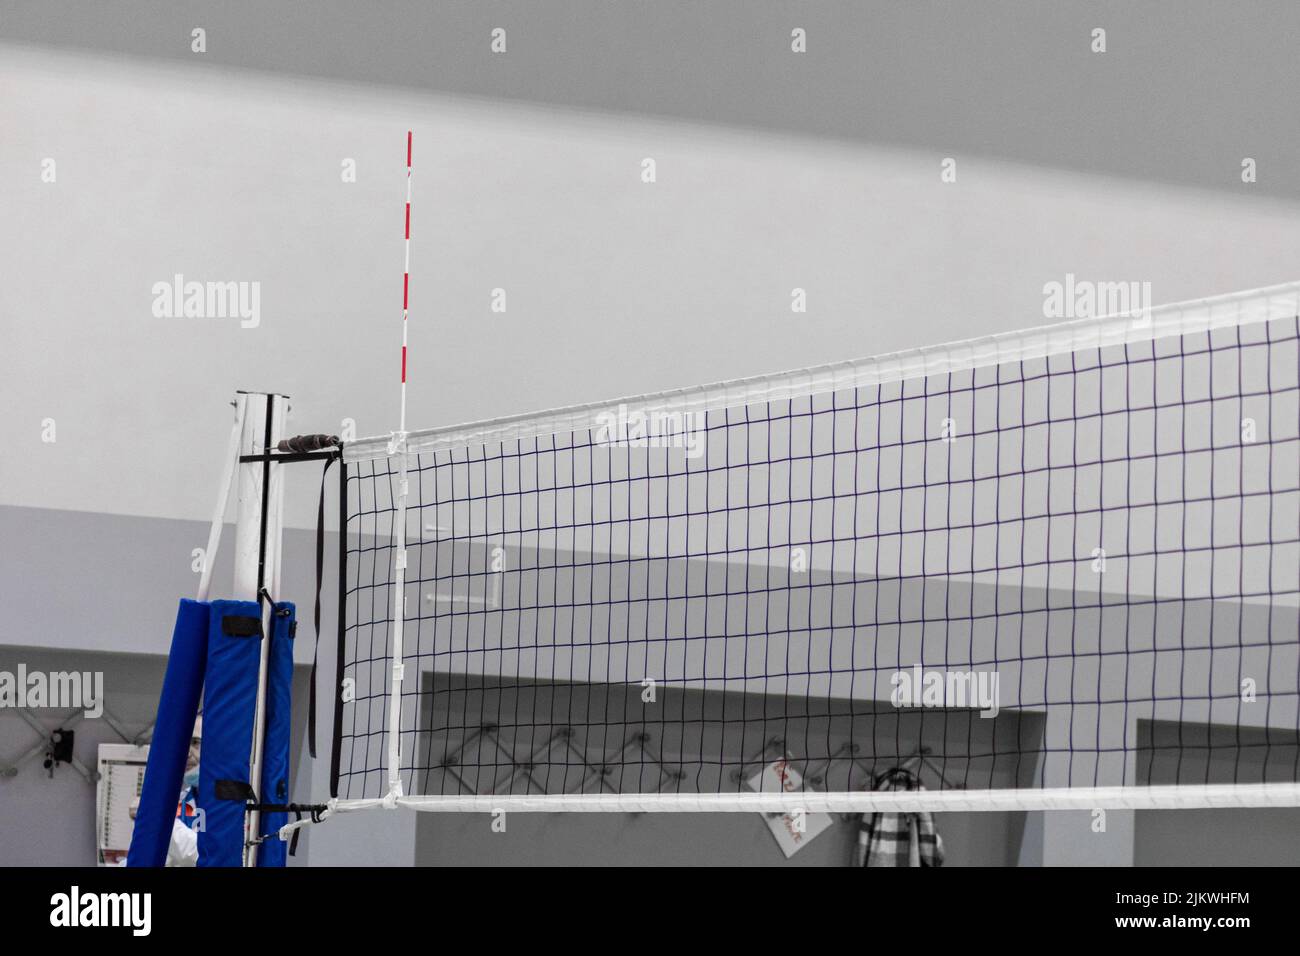 A natural view of a volleyball net on the field Stock Photo